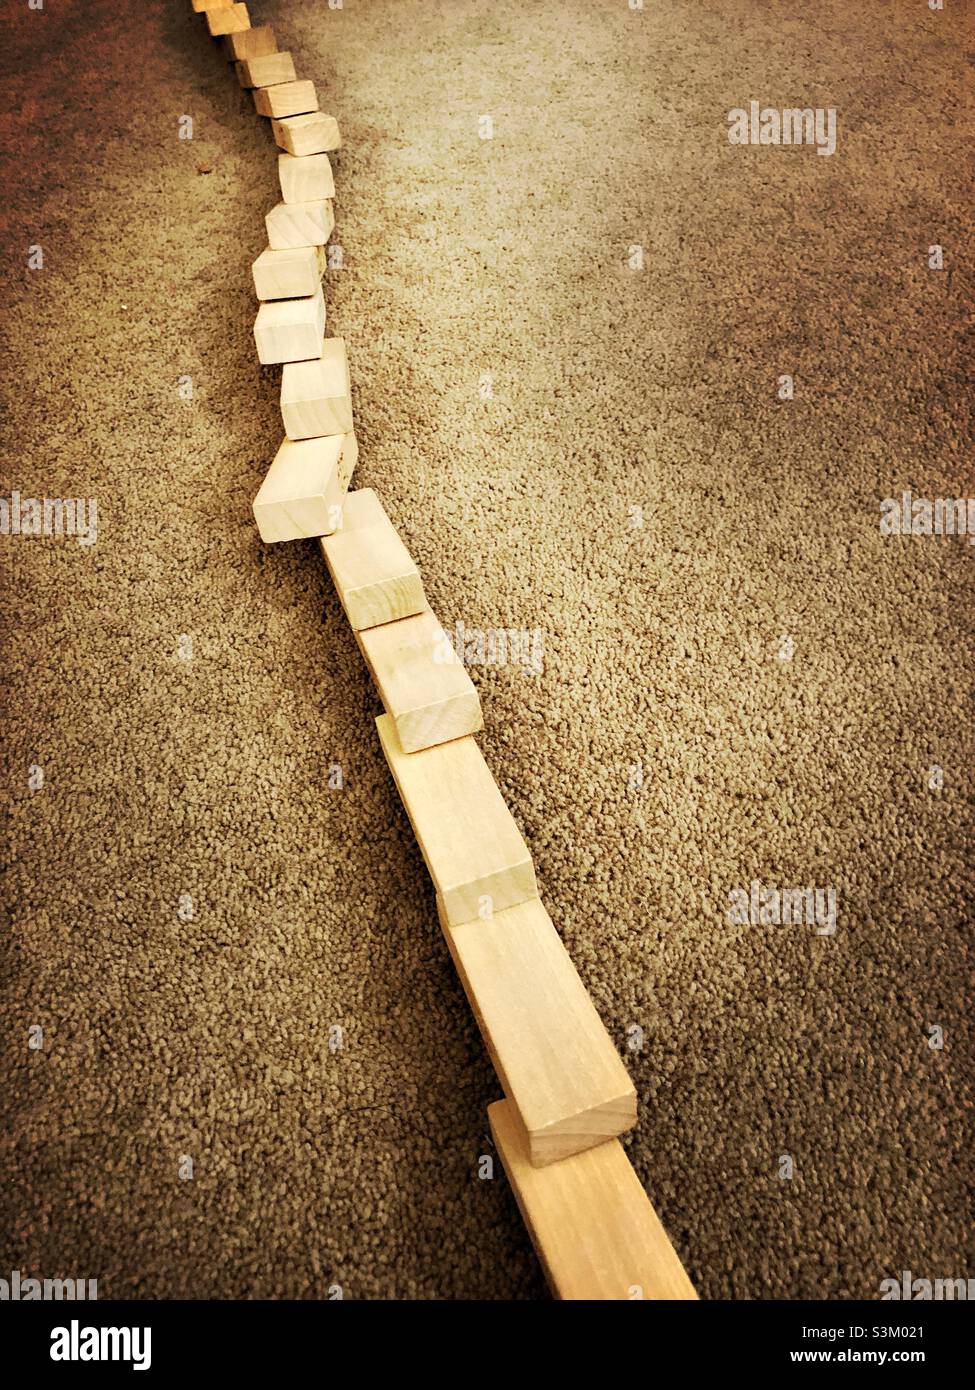 Toy wooden bricks fallen in a line on a carpet Stock Photo